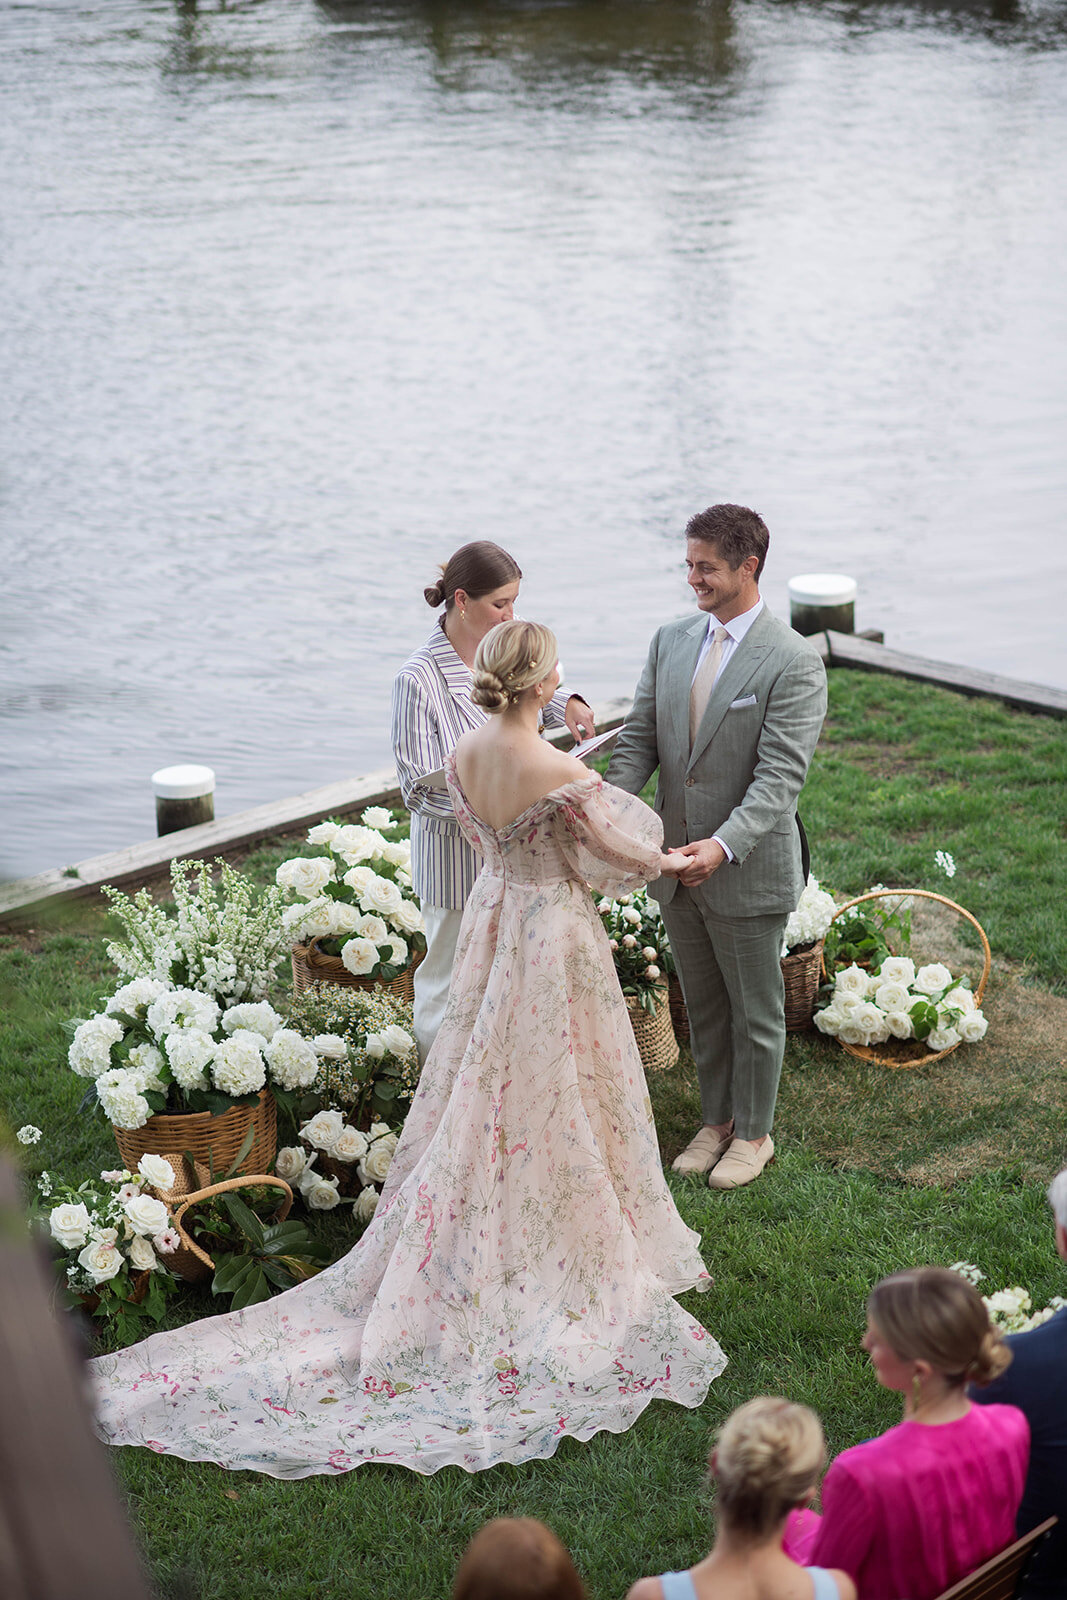 Bride and groom ceremony photograph standing in front of wicker baskets filled with white garden roses, white hydrangea, blush peonies, and blush butterfly ranunculus.